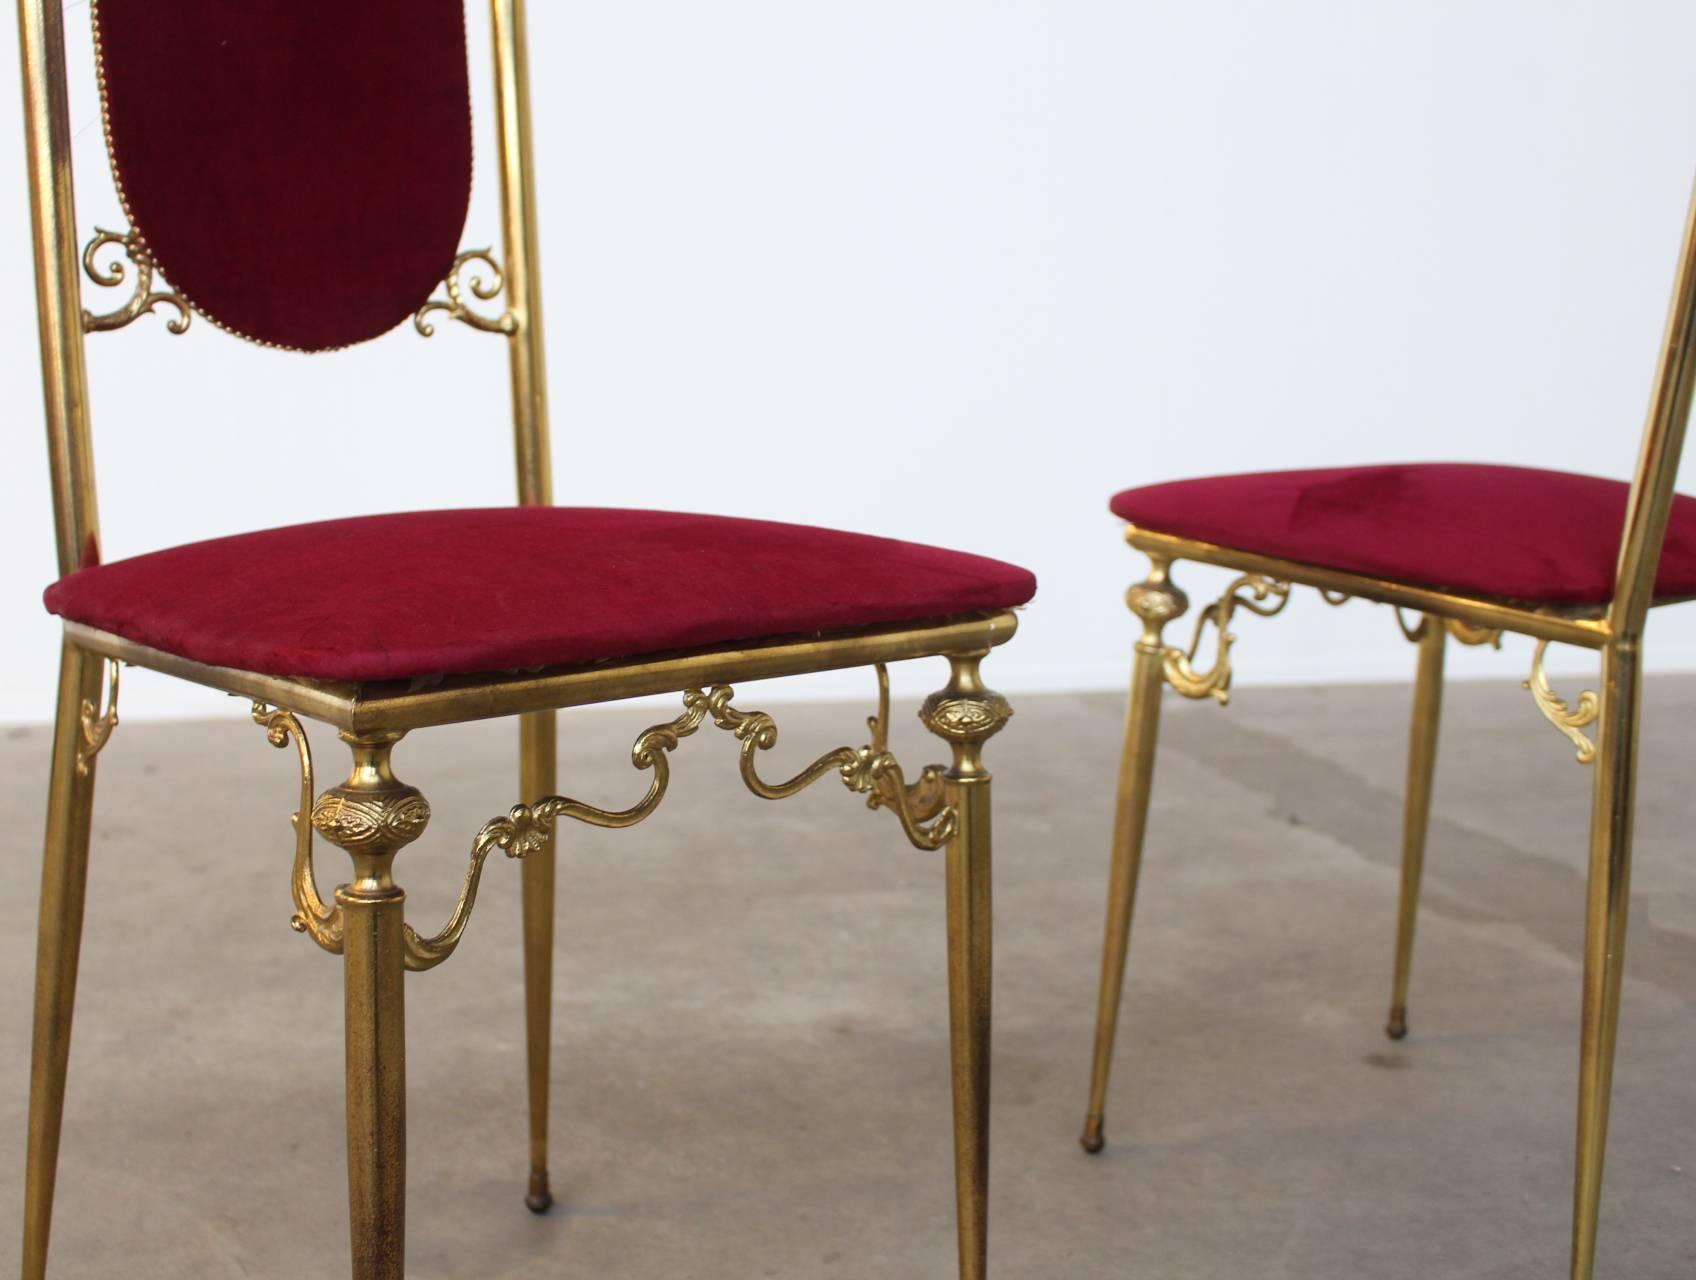 Beautiful side chairs upholstered in red velvet with a beautifully crafted brass frame. These chairs are new old stock, they have never been used previously. The former owner still left the original plastic vacuum cover over the seats, which we